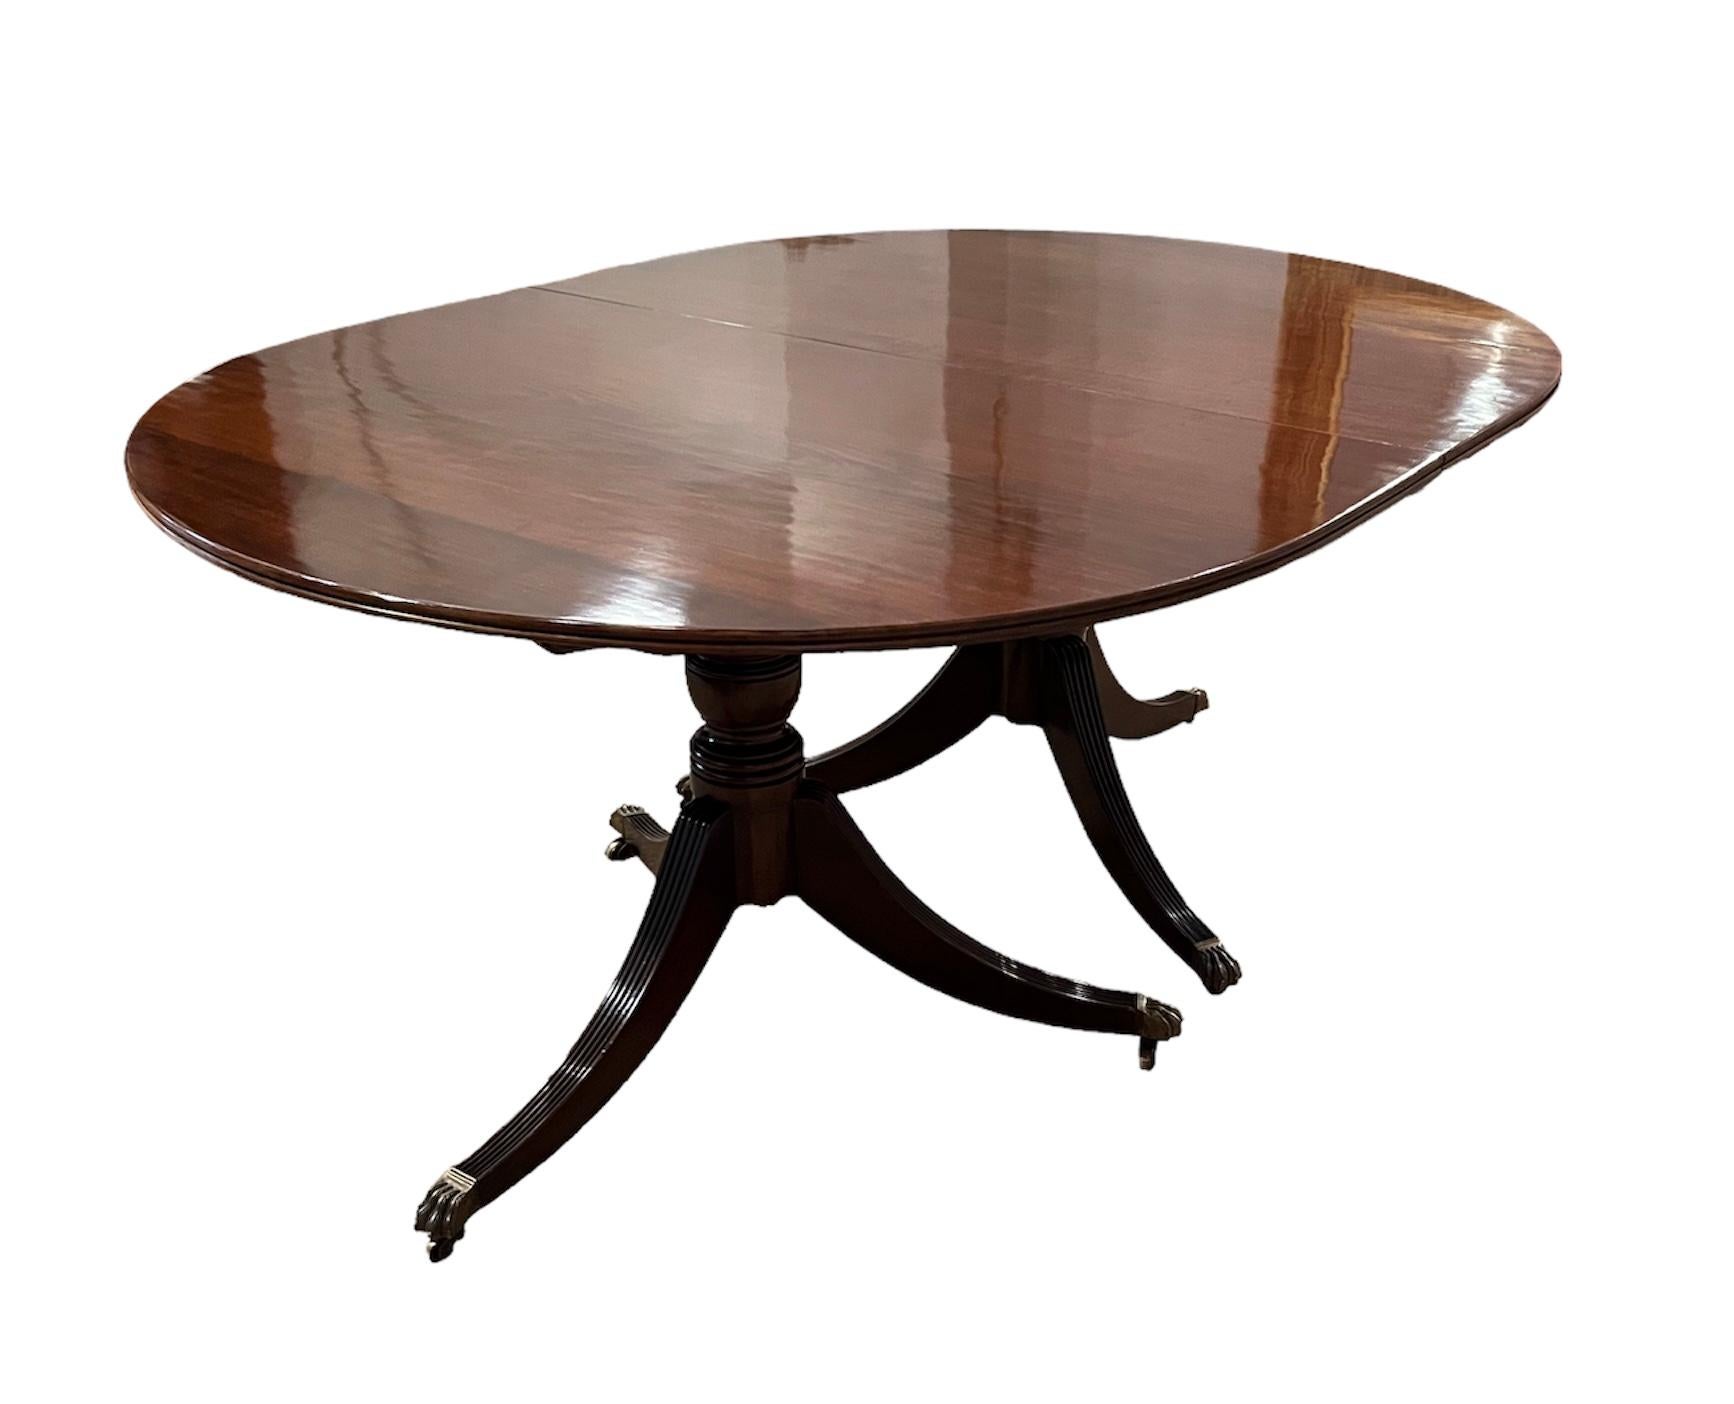 English George III Style Mahogany Dining Table. 2 pedestals 2 leaves 